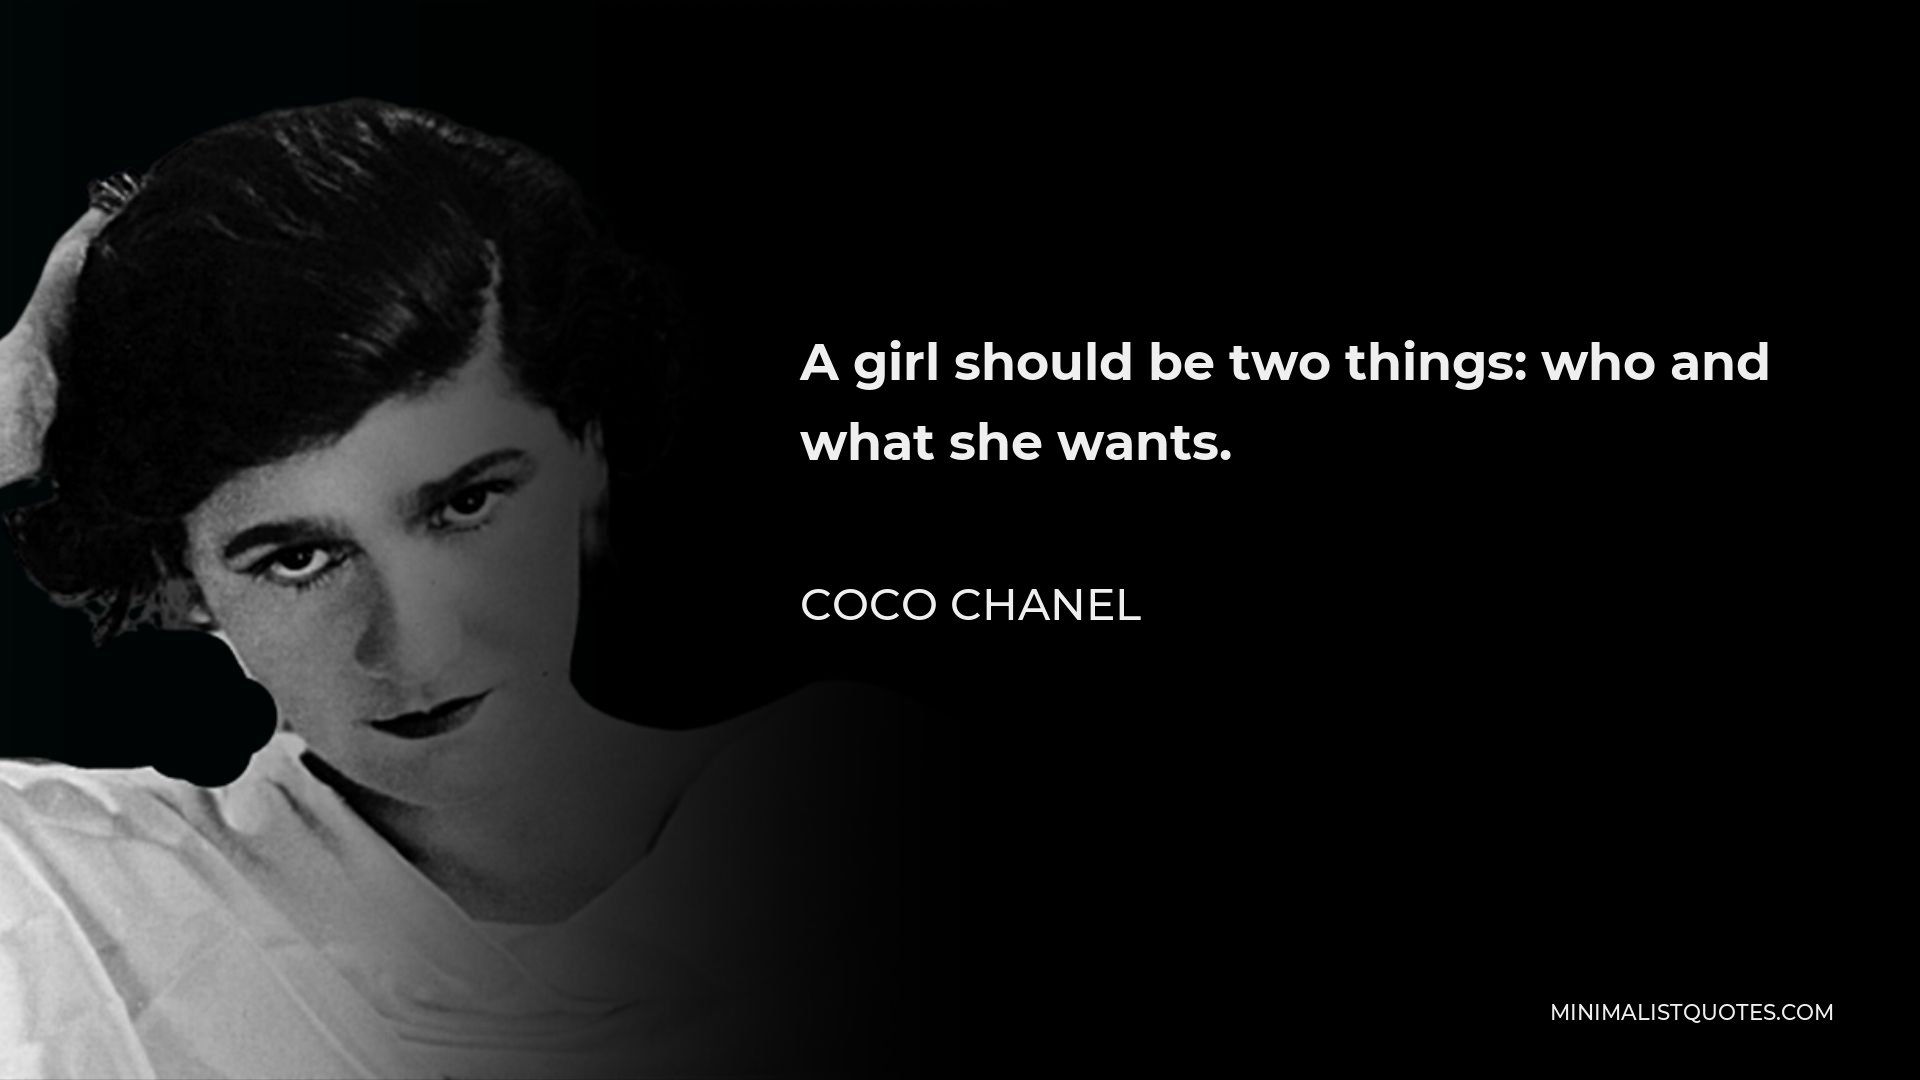 Coco Chanel Quote - A girl should be two things: who and what she wants.